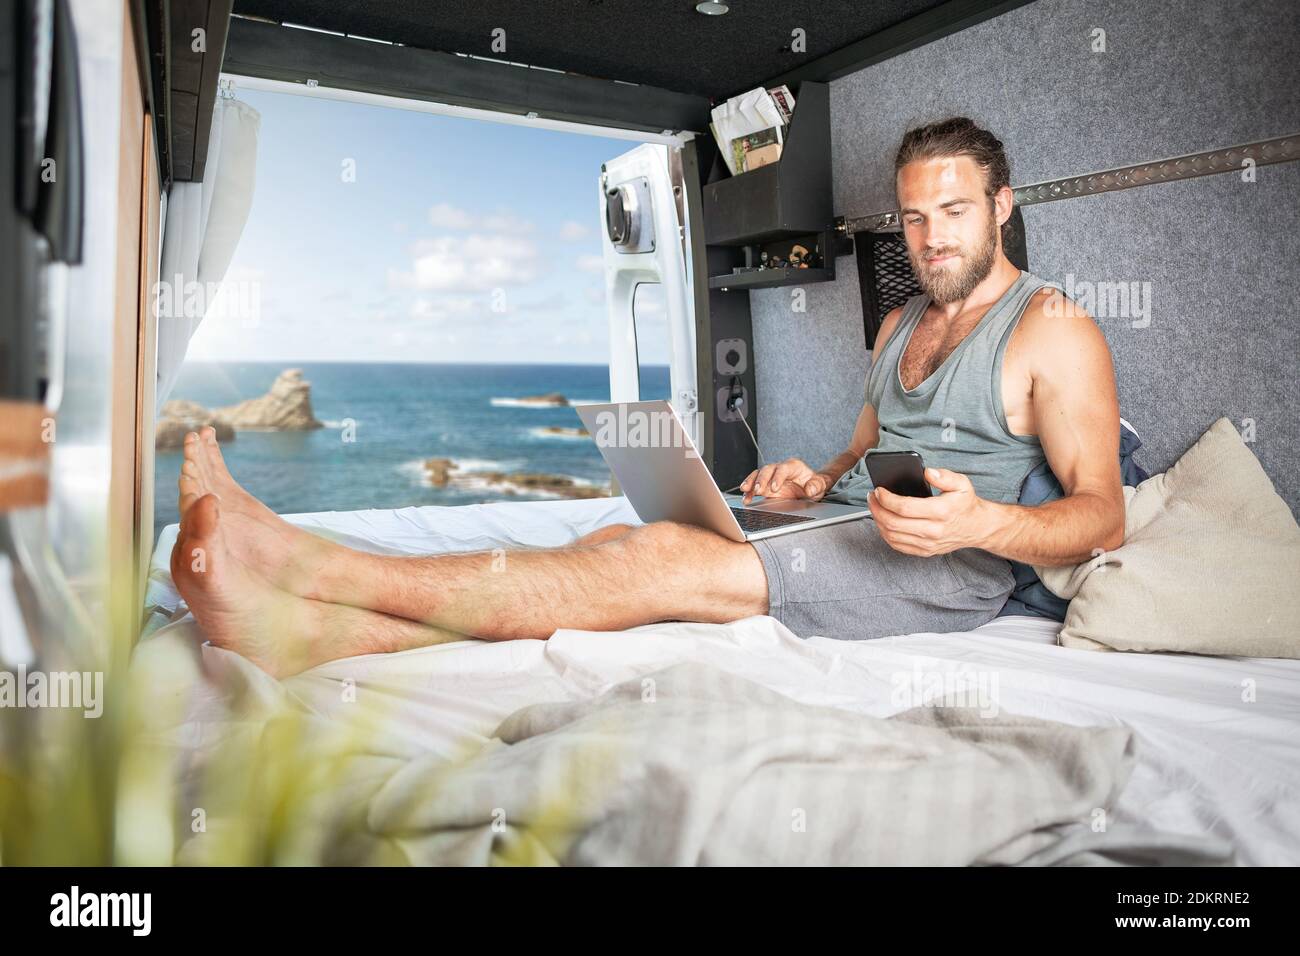 Man inside a camper van using laptop and smartphone Stock Photo